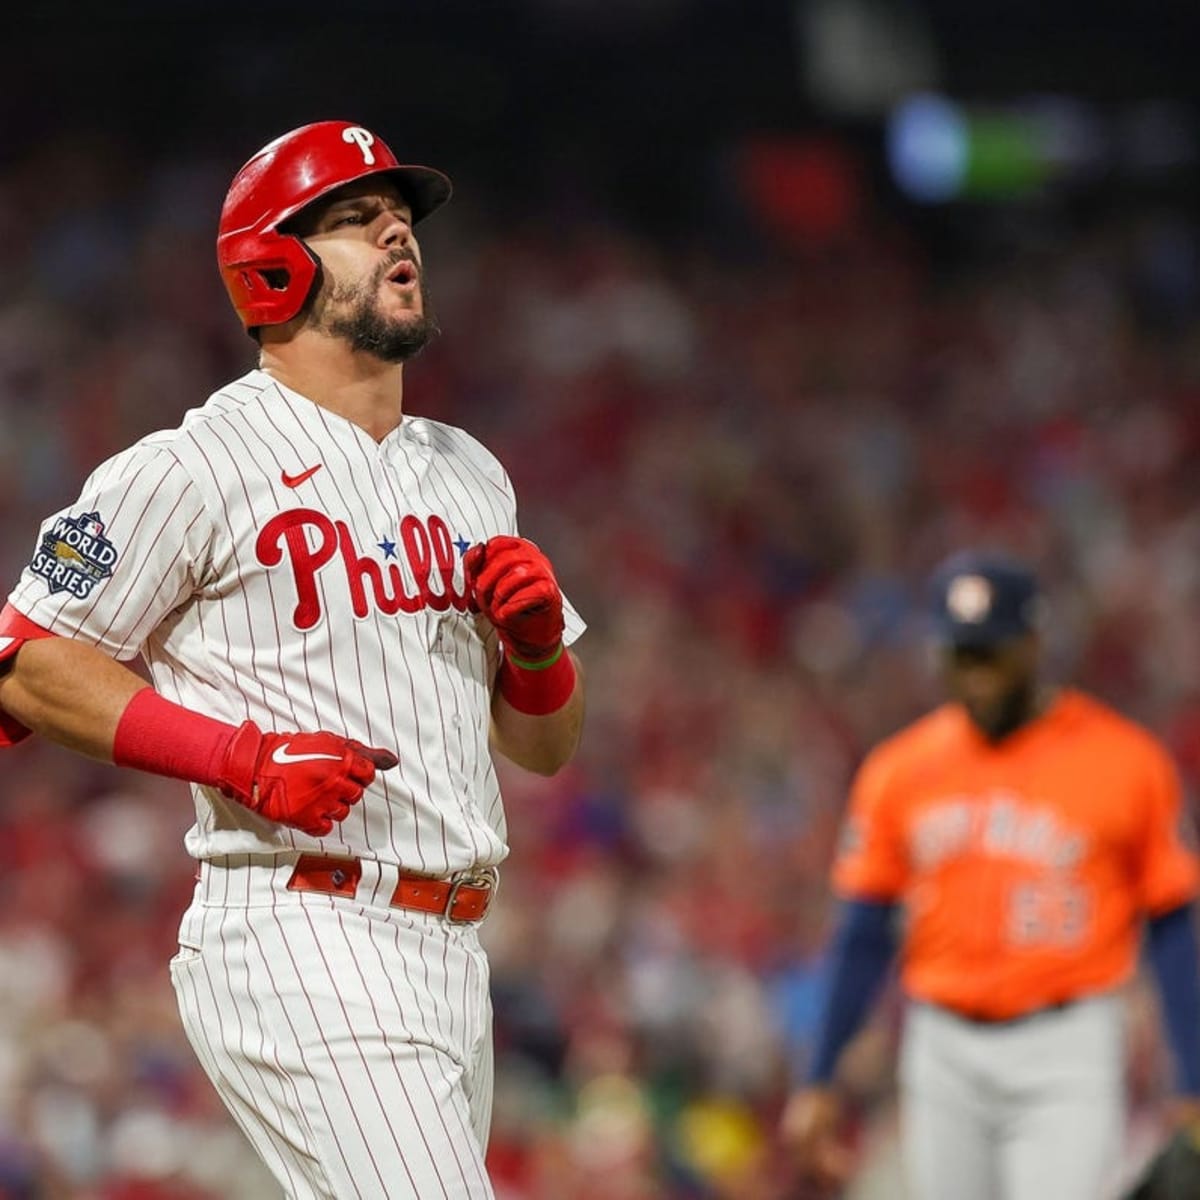 Watch Washington Nationals at Philadelphia Phillies Stream live - How to Watch and Stream Major League and College Sports